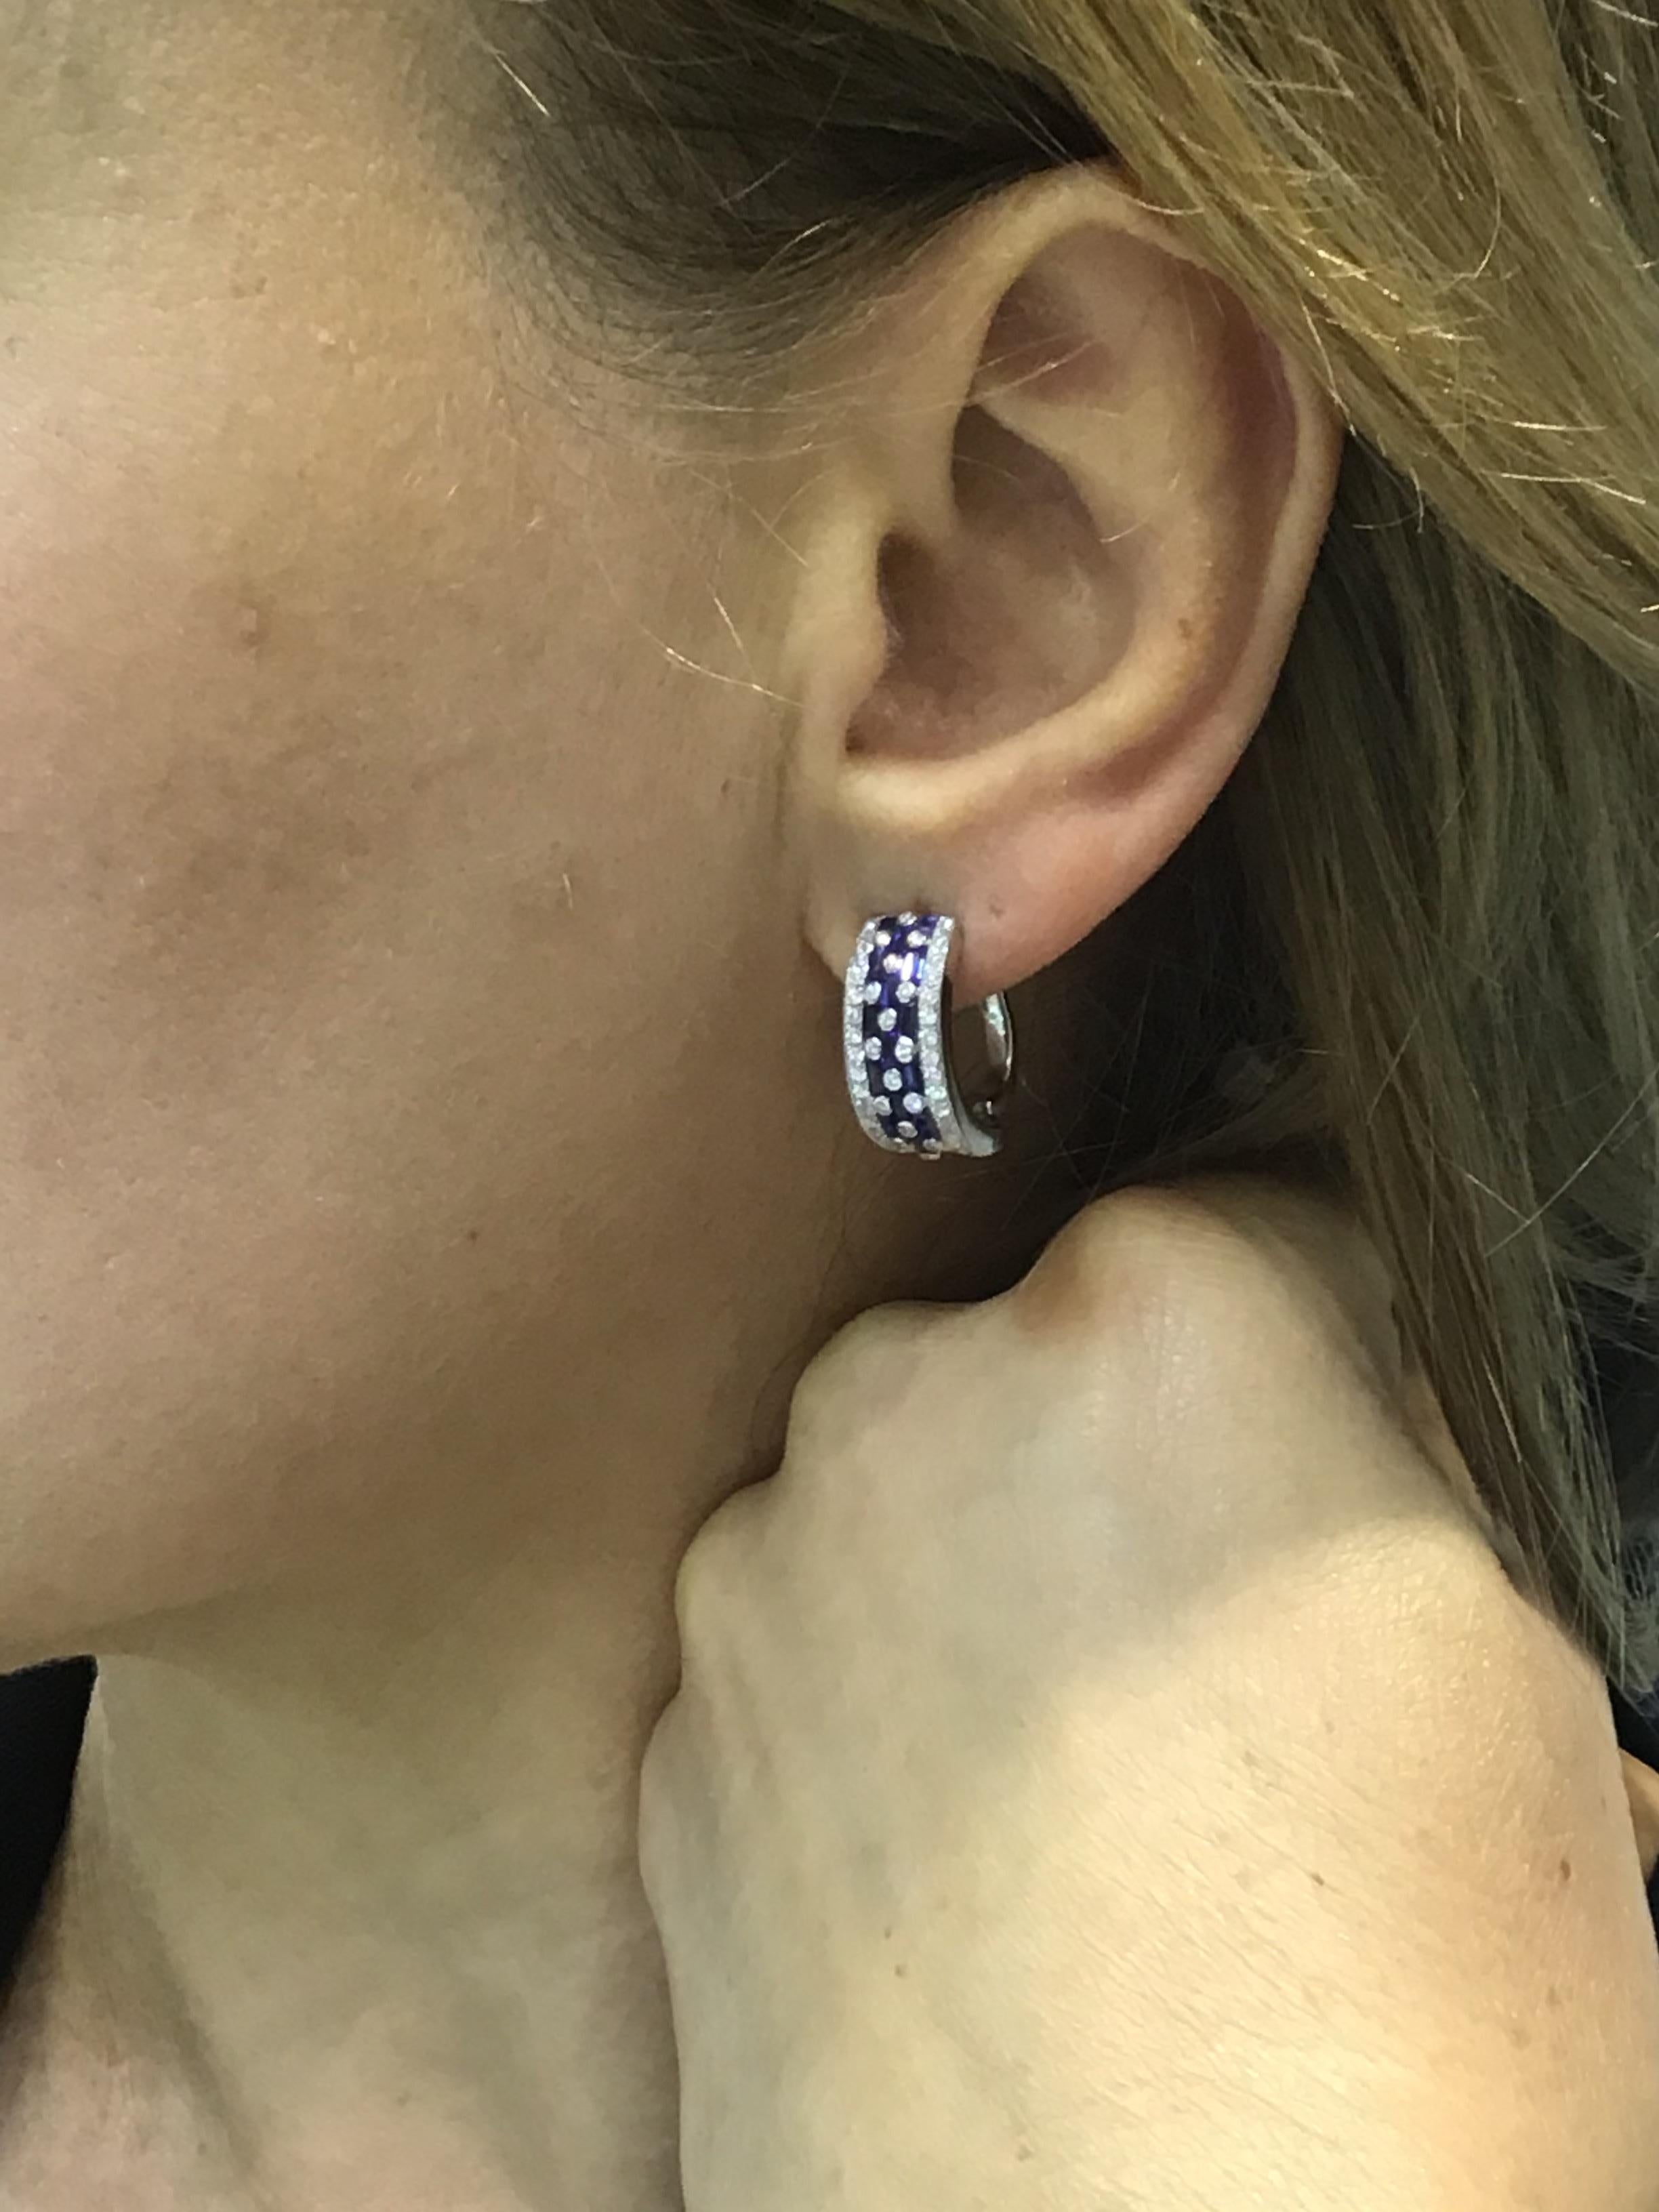 Earrings White Gold 14 K (Matching Ring Available)
Diamond 92-Round 57-0,57-4/4A
Blue Sapphire 2-21-0,08 (4)/2A
Blue Sapphire 26-Round-1,82 (5)/3
Weight 6.34 grams

With a heritage of ancient fine Swiss jewelry traditions, NATKINA is a Geneva based